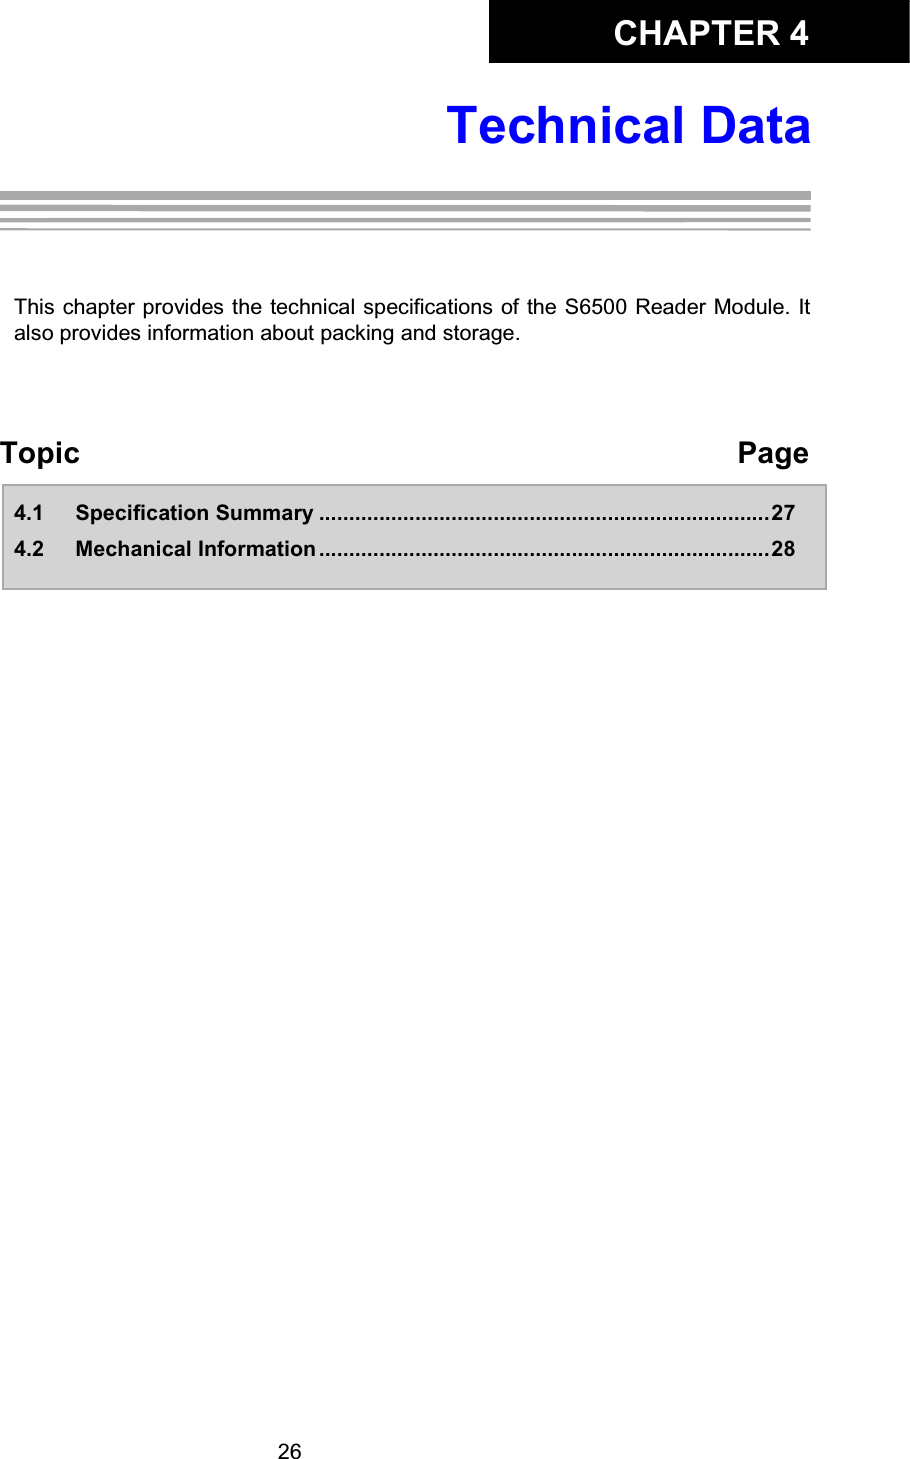 CHAPTER 426Technical DataChapter 4:Technical DataThis chapter provides the technical specifications of the S6500 Reader Module. Italso provides information about packing and storage. Topic  Page4.1 Specification Summary ...........................................................................274.2 Mechanical Information ...........................................................................28